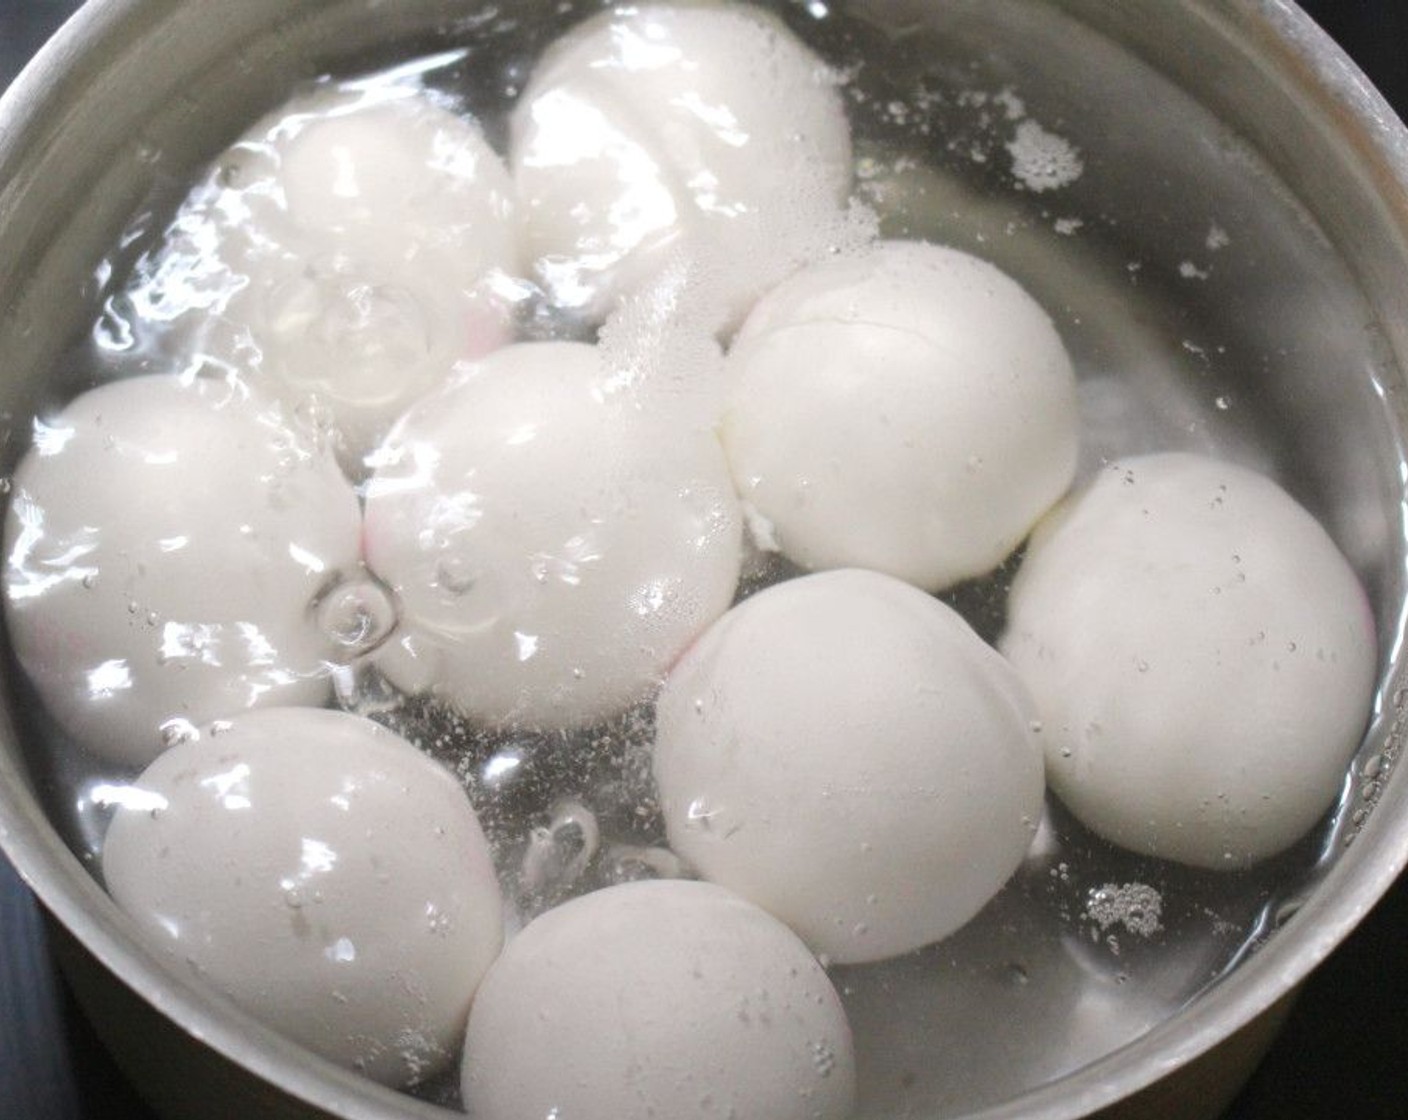 step 1 Hard-boil the Eggs (8) by placing in 1-inch of cold water and heating, covered, for 13 minutes. Run under cold water once time is up so they don't overcook.